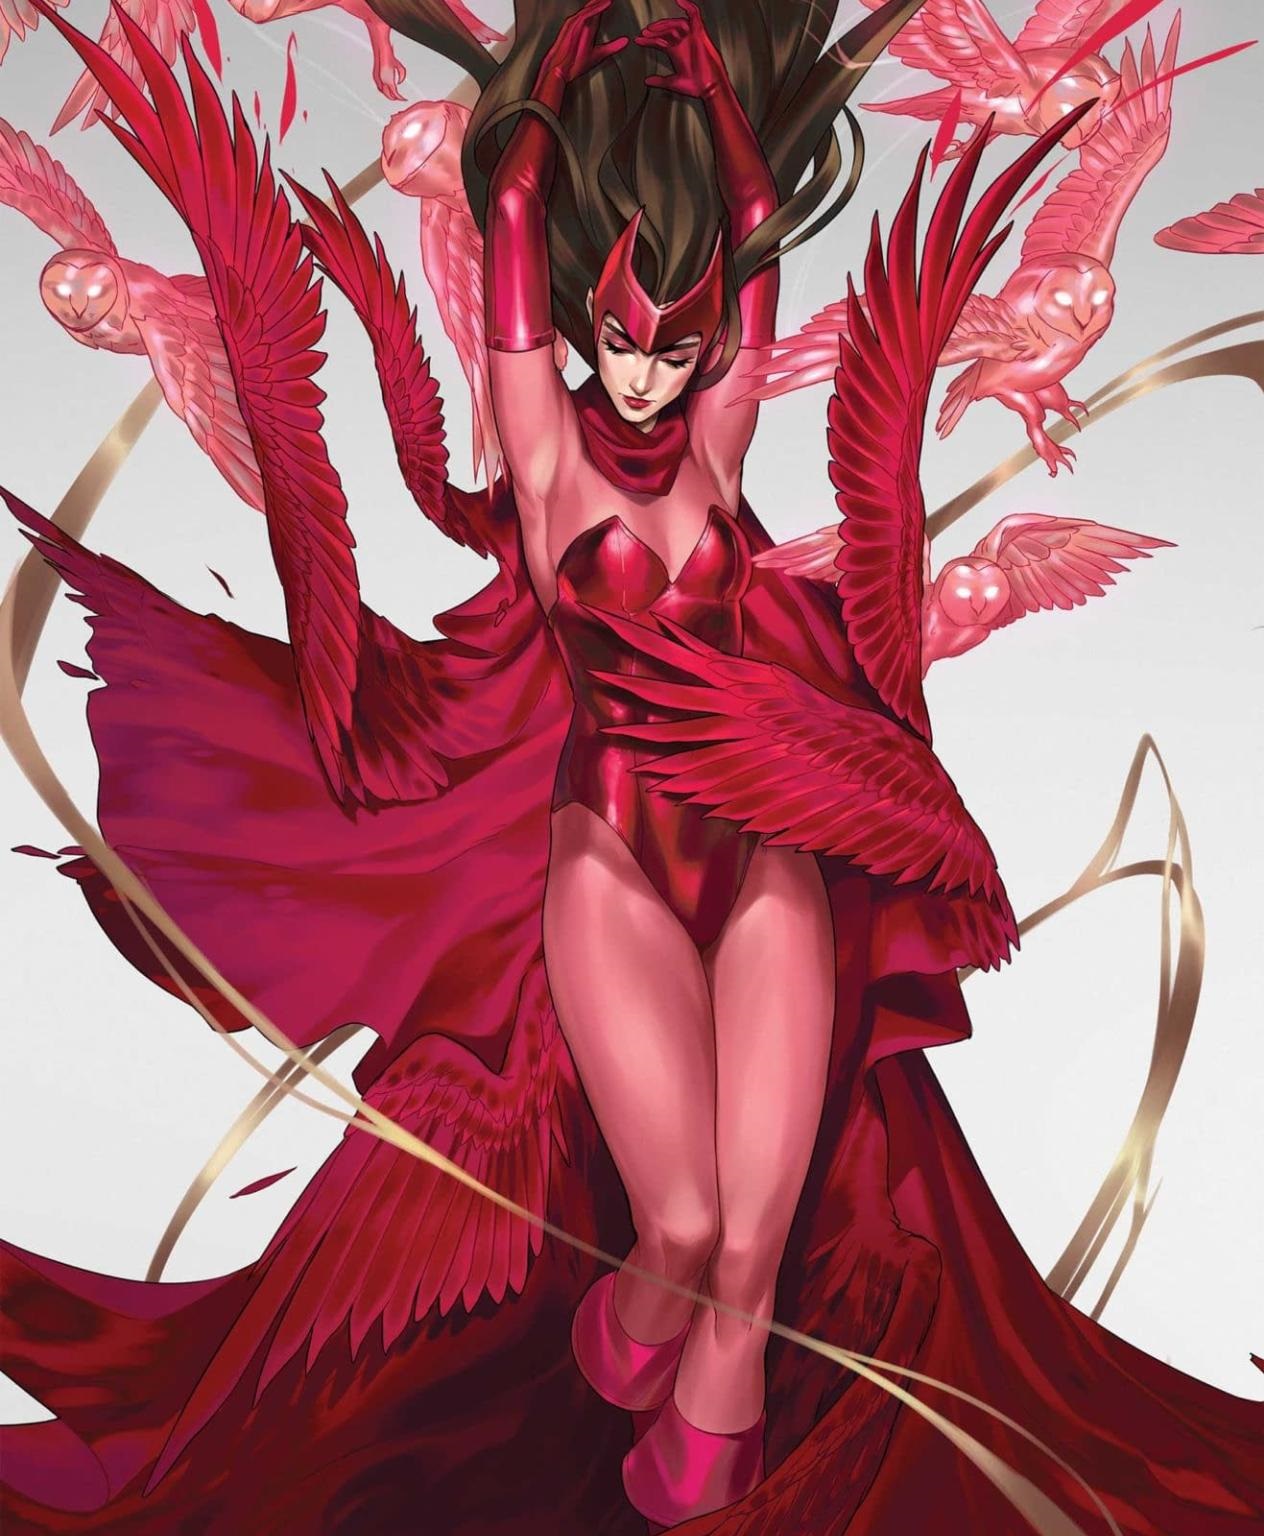 Marvel Entertainment on X: The Scarlet Witch is one of the most  super-powered beings in #MarvelComics, but her history with magic is…  complicated. Explore these must-reads and dive into Wanda Maximoff's story